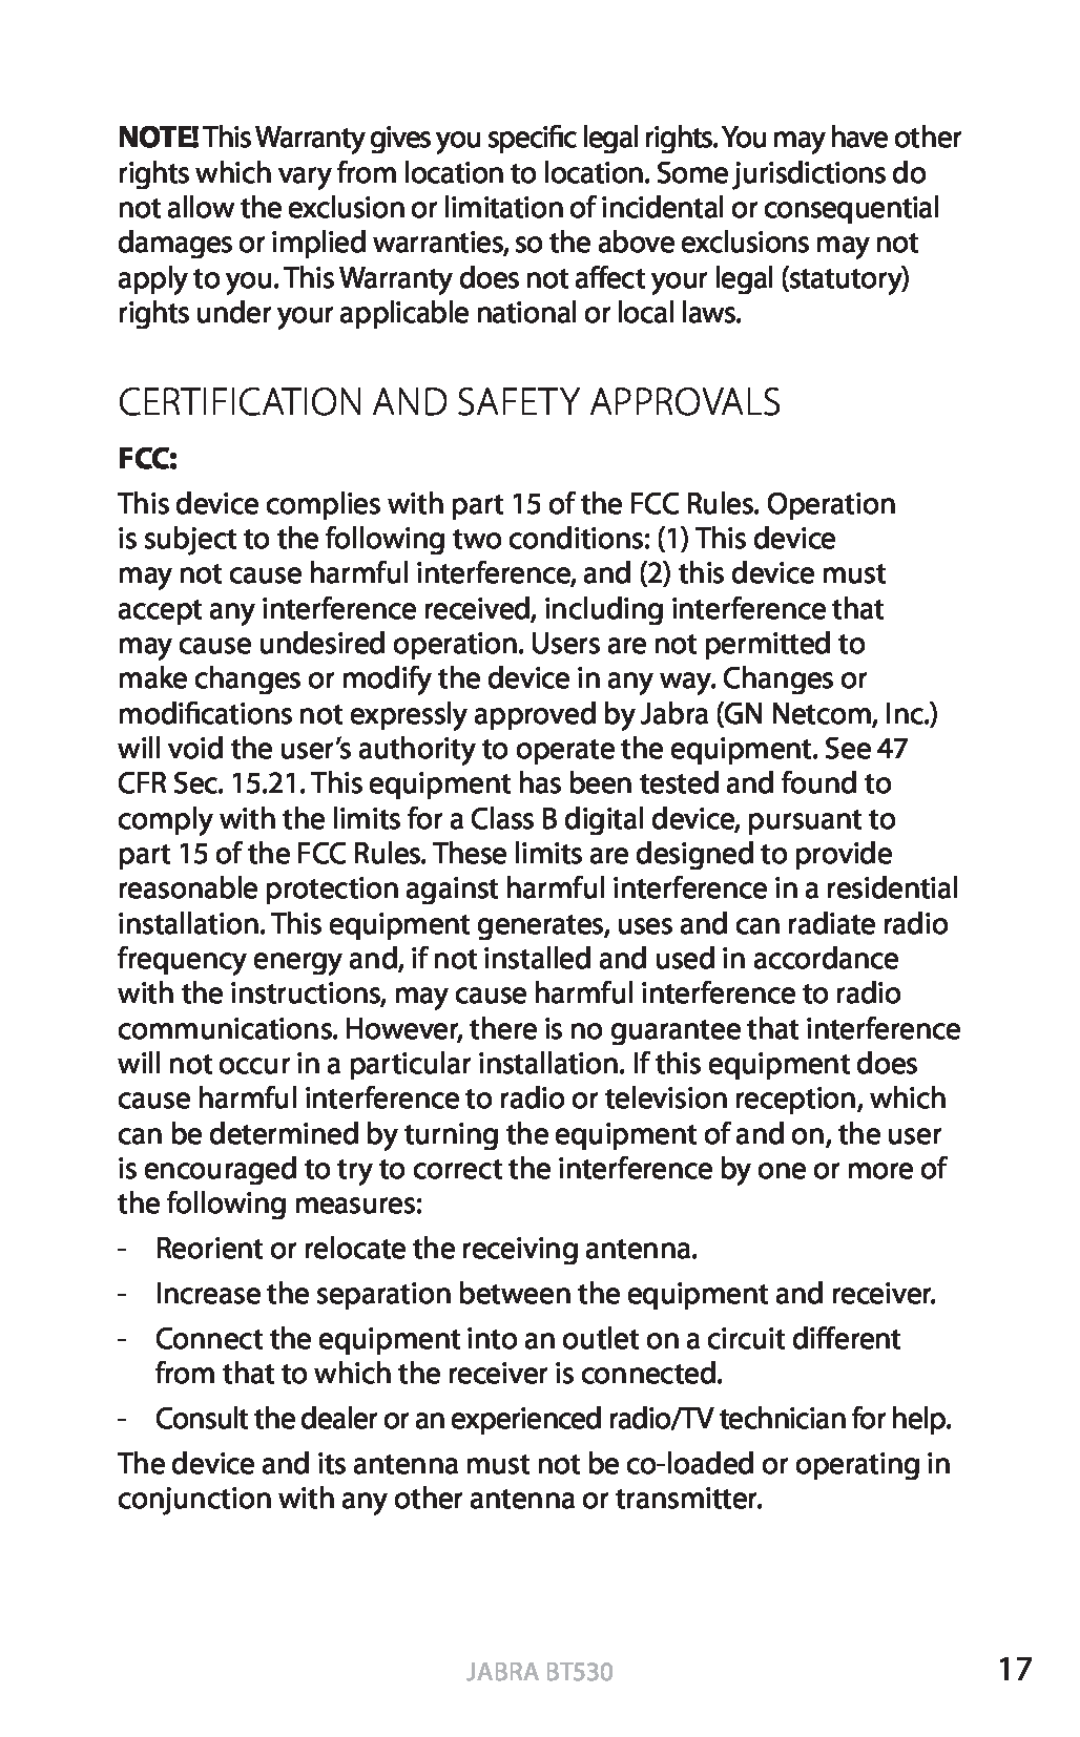 Jabra BT530 user manual Certification and safety approvals, english 